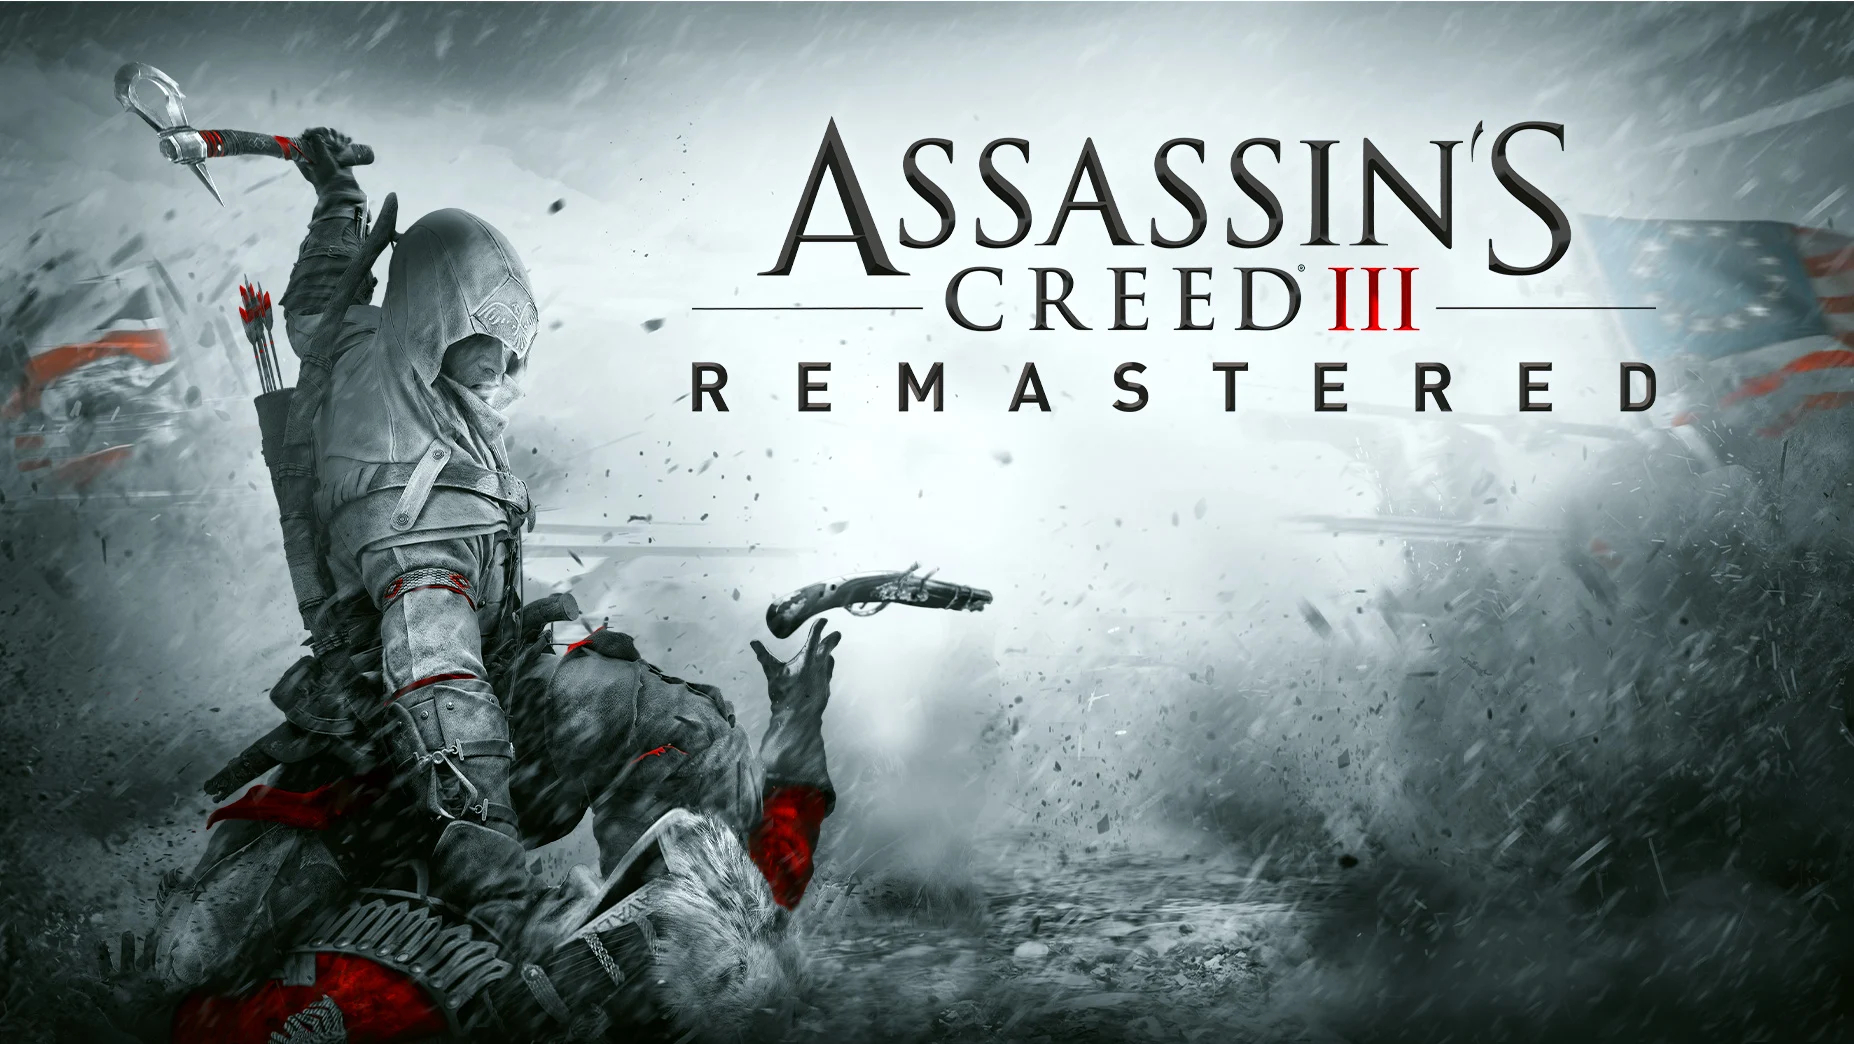 Assassin's Creed III Remastered Technical Review: Eye-Sassination